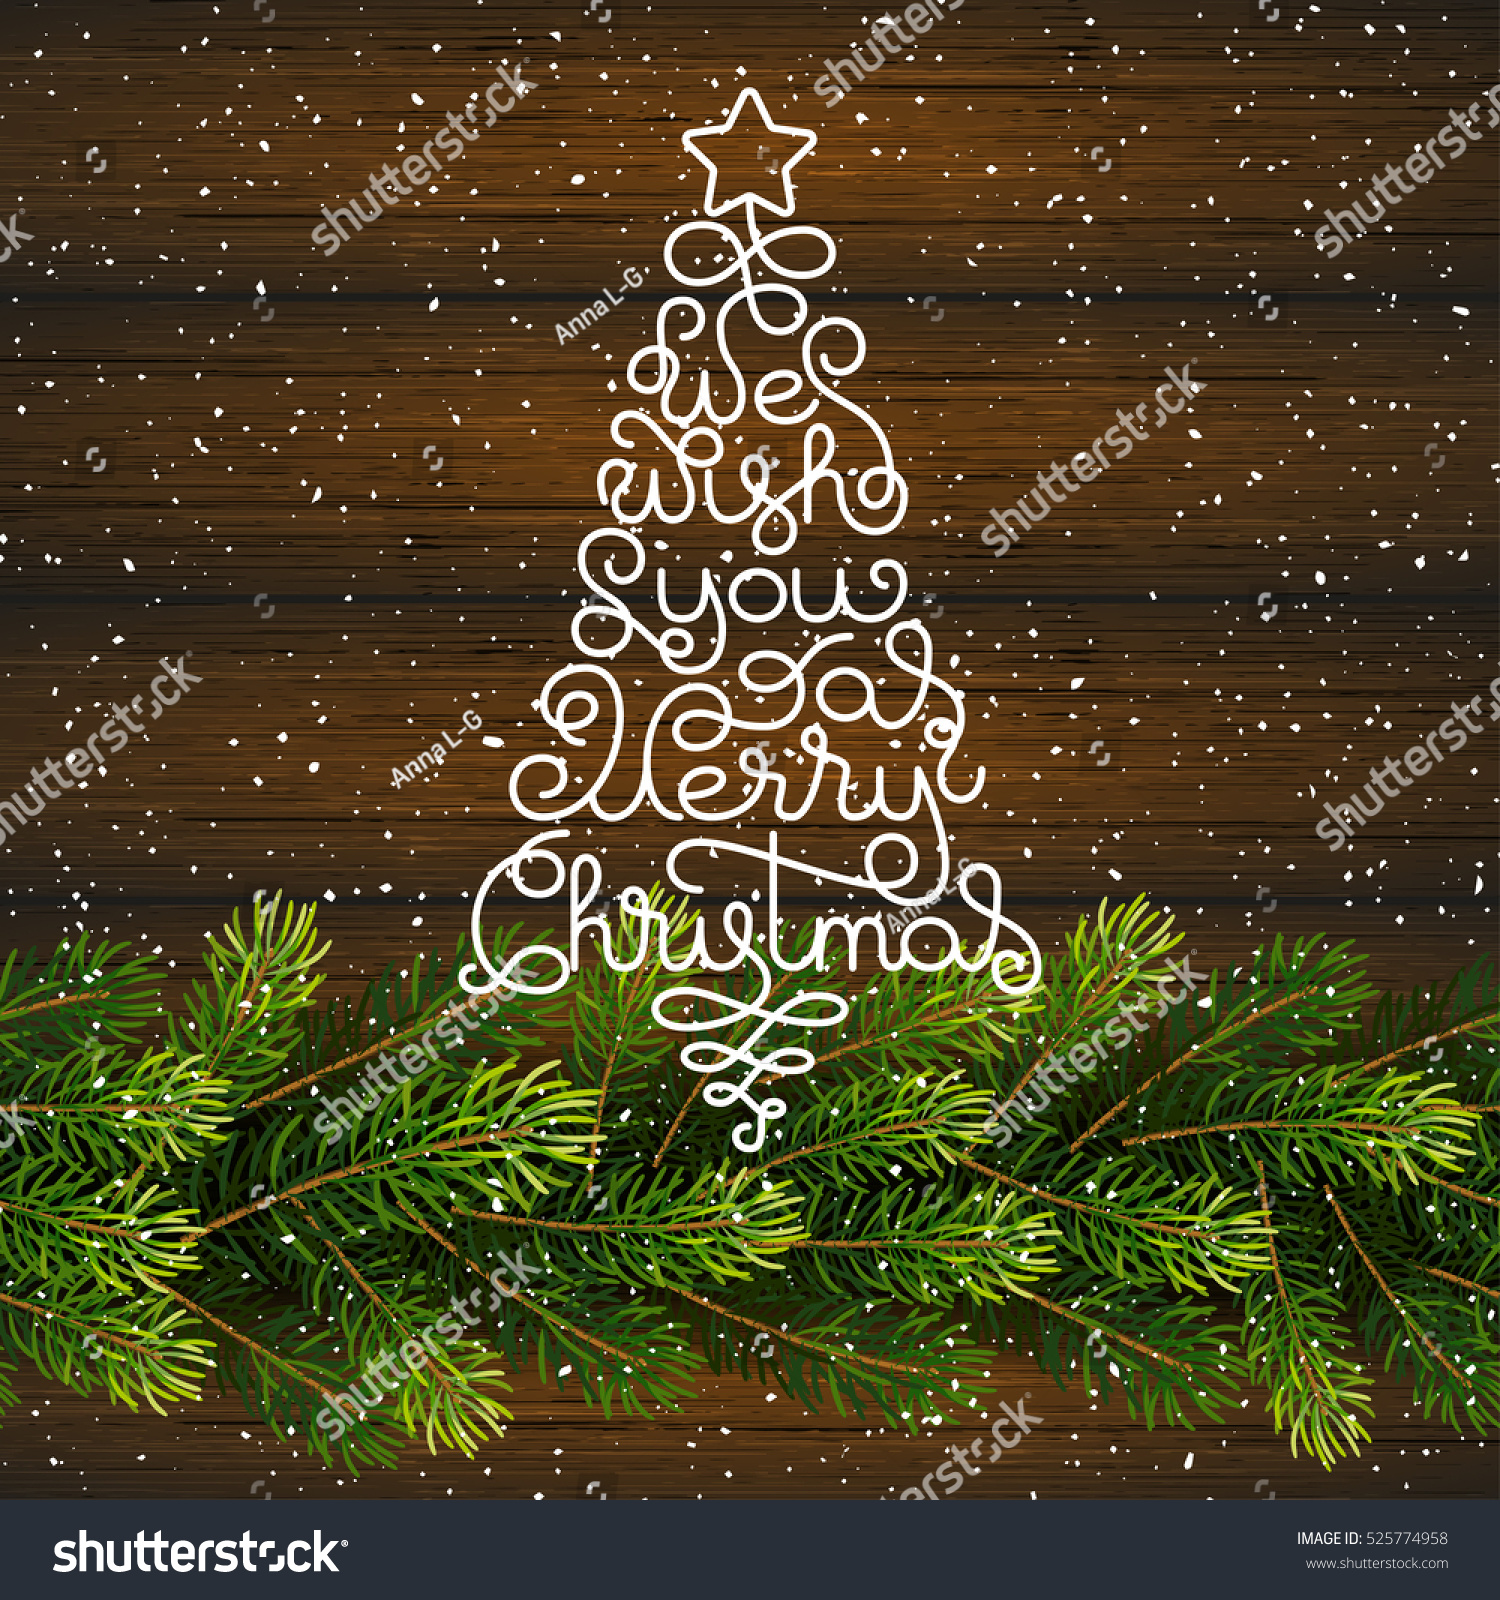 Holiday t card with hand lettering We Wish You a Merry Christmas in the form of